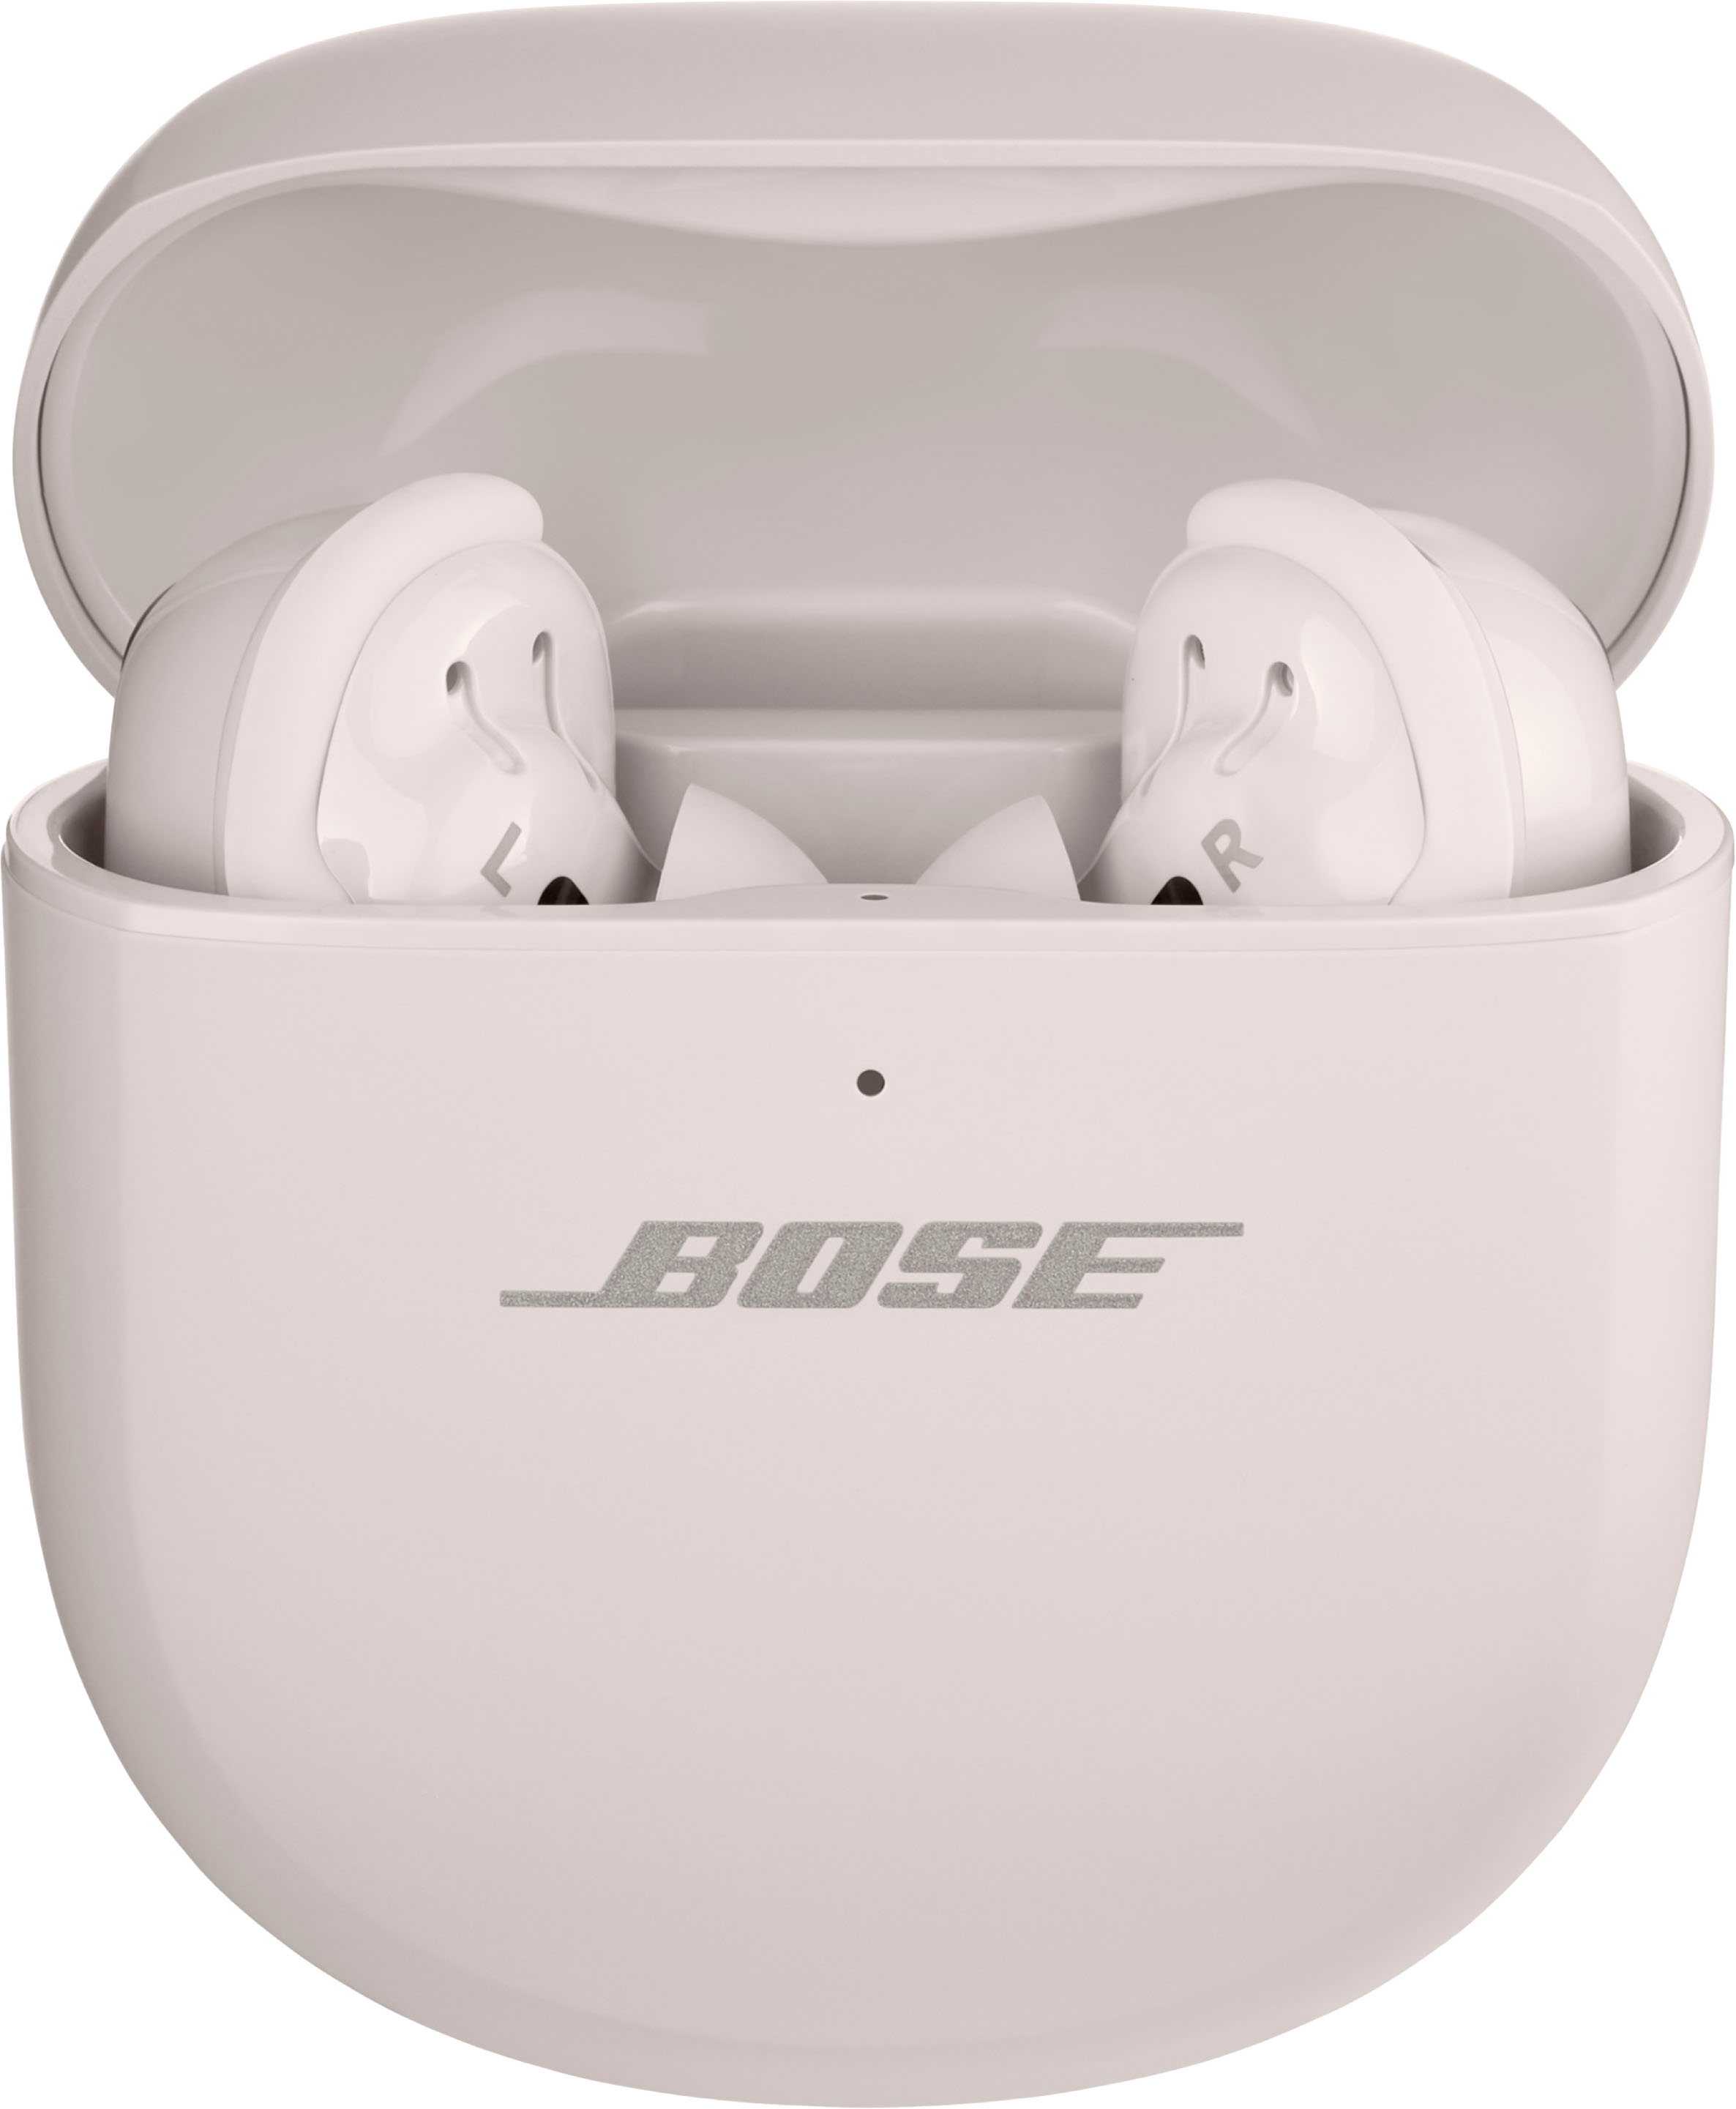 Bose QuietComfort Ultra Wireless Noise Cancelling Over-the-Ear Headphones  Black 880066–0100 - Best Buy